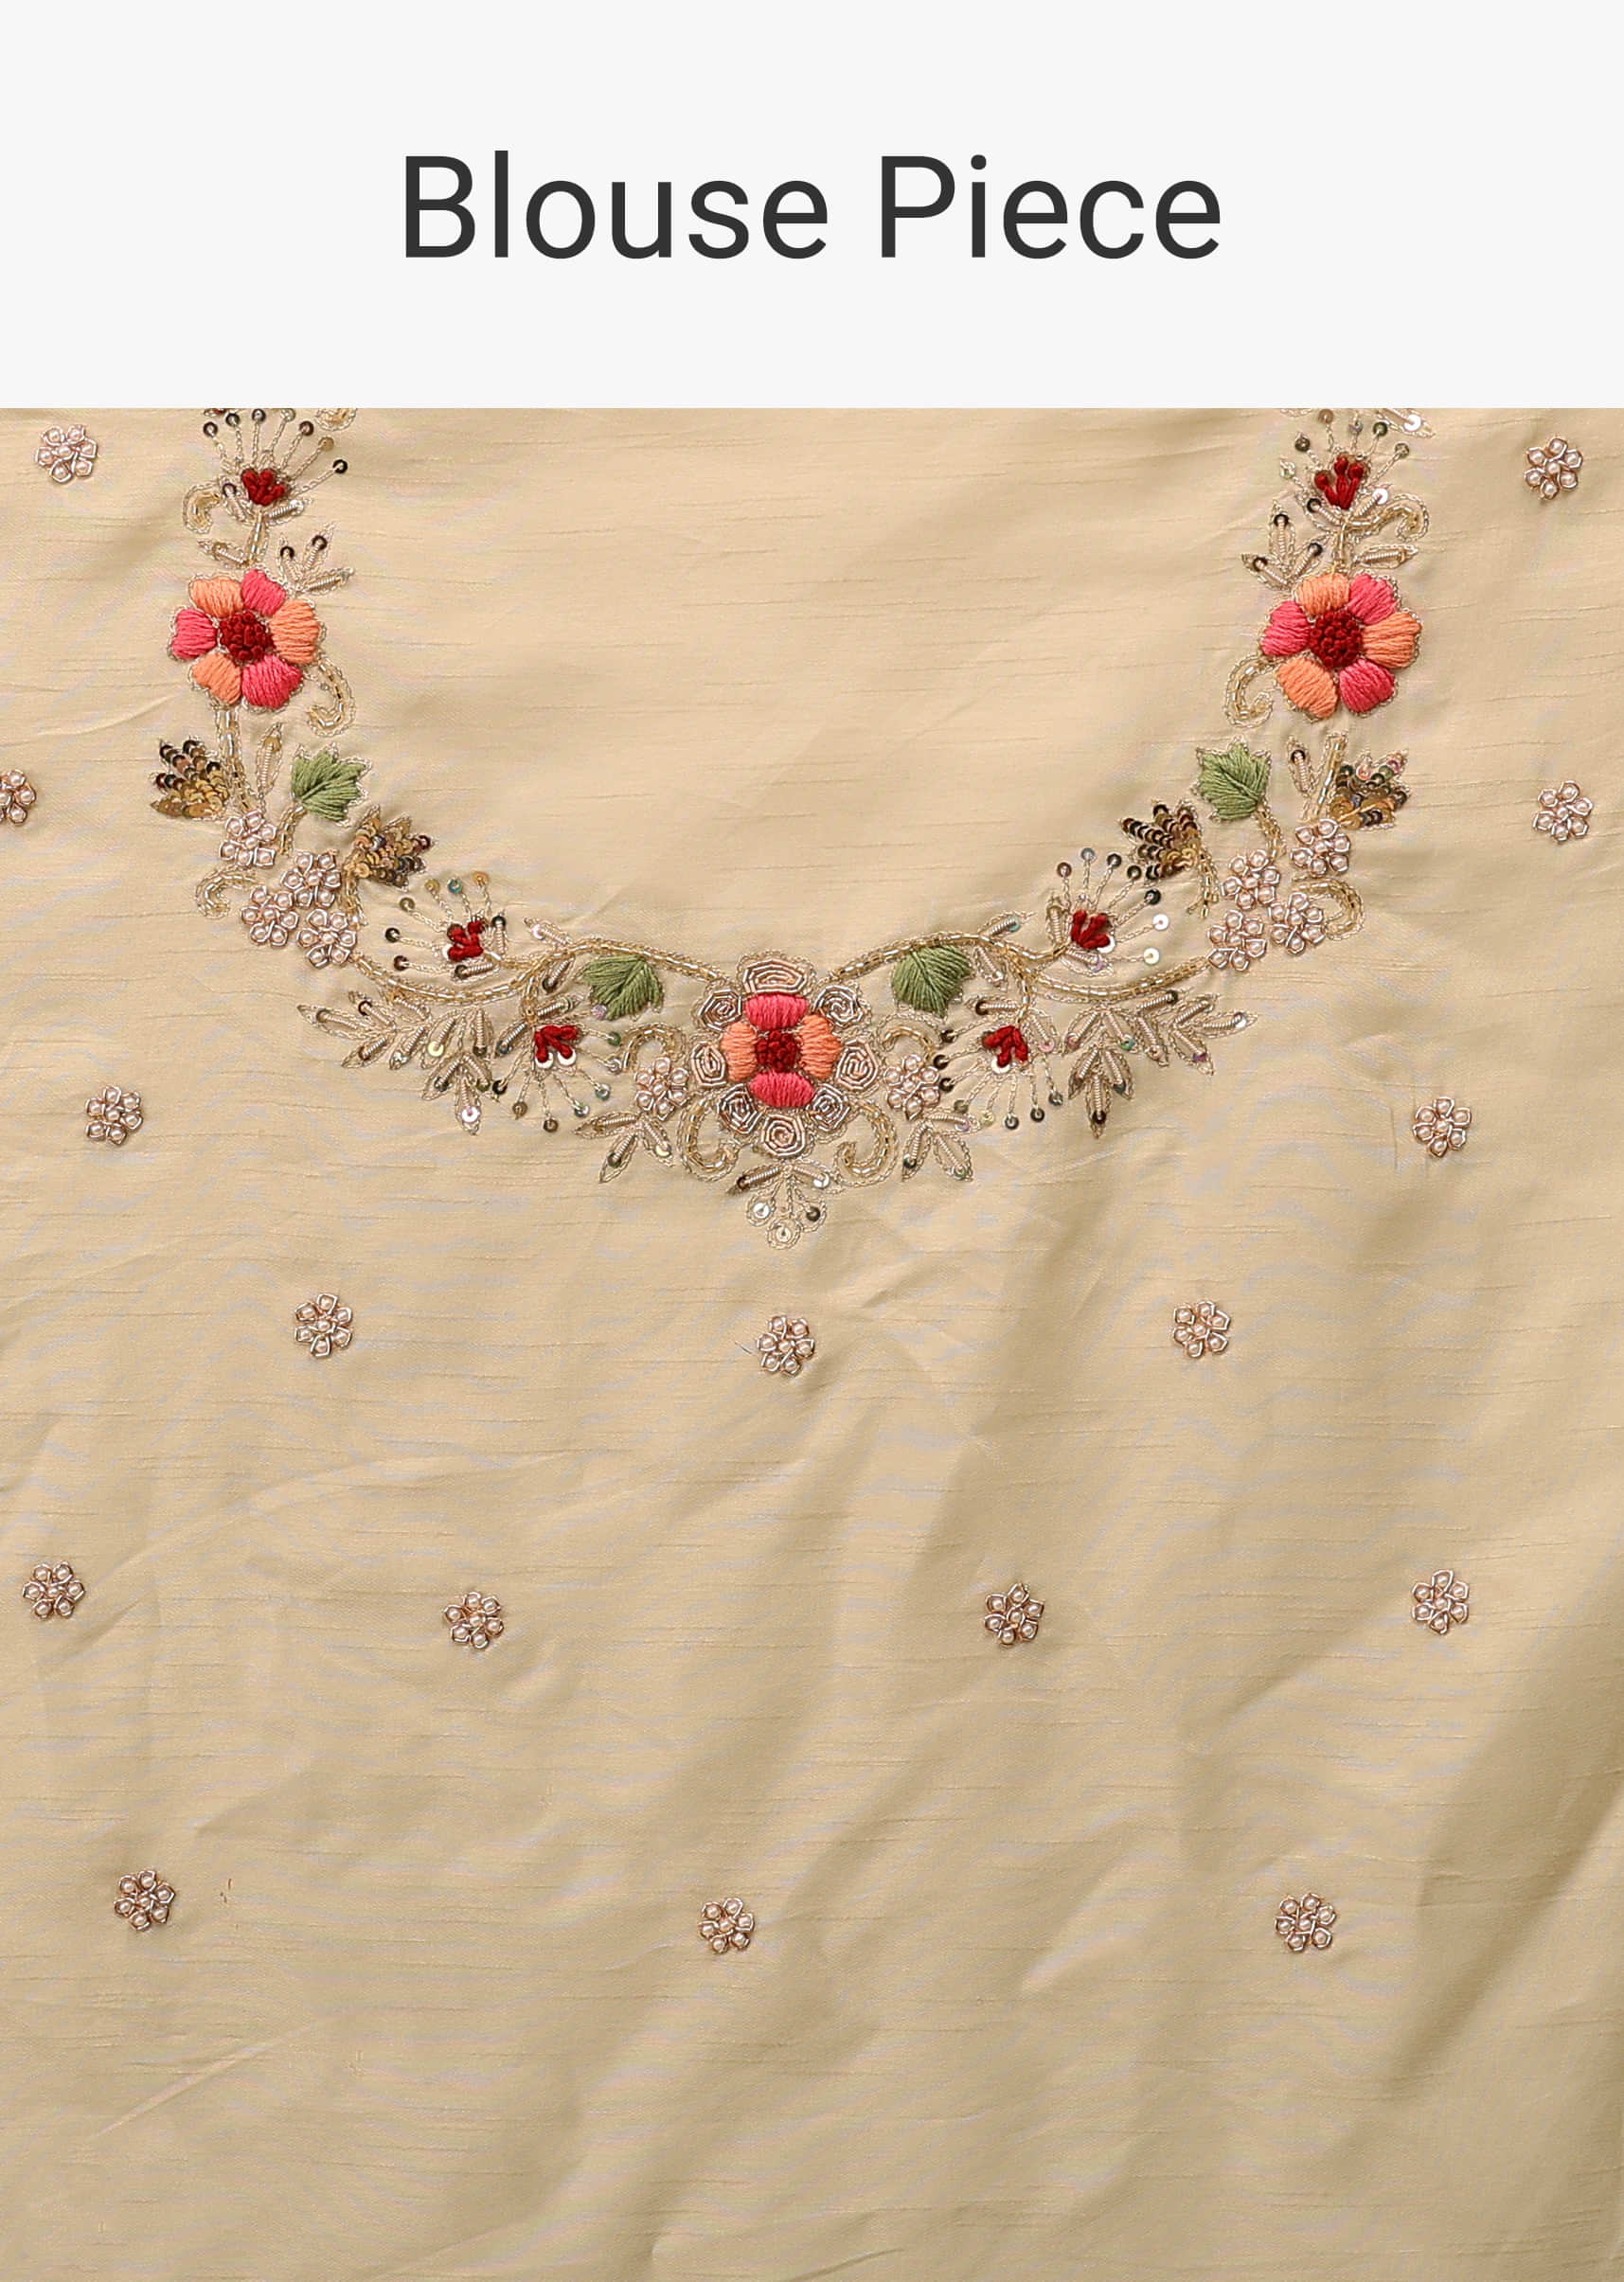 Off-White Shimmer Saree In Pink And Coral Resham Embroidery On The Border, Crafted In Shimmer With Floral Embroidery Buttis